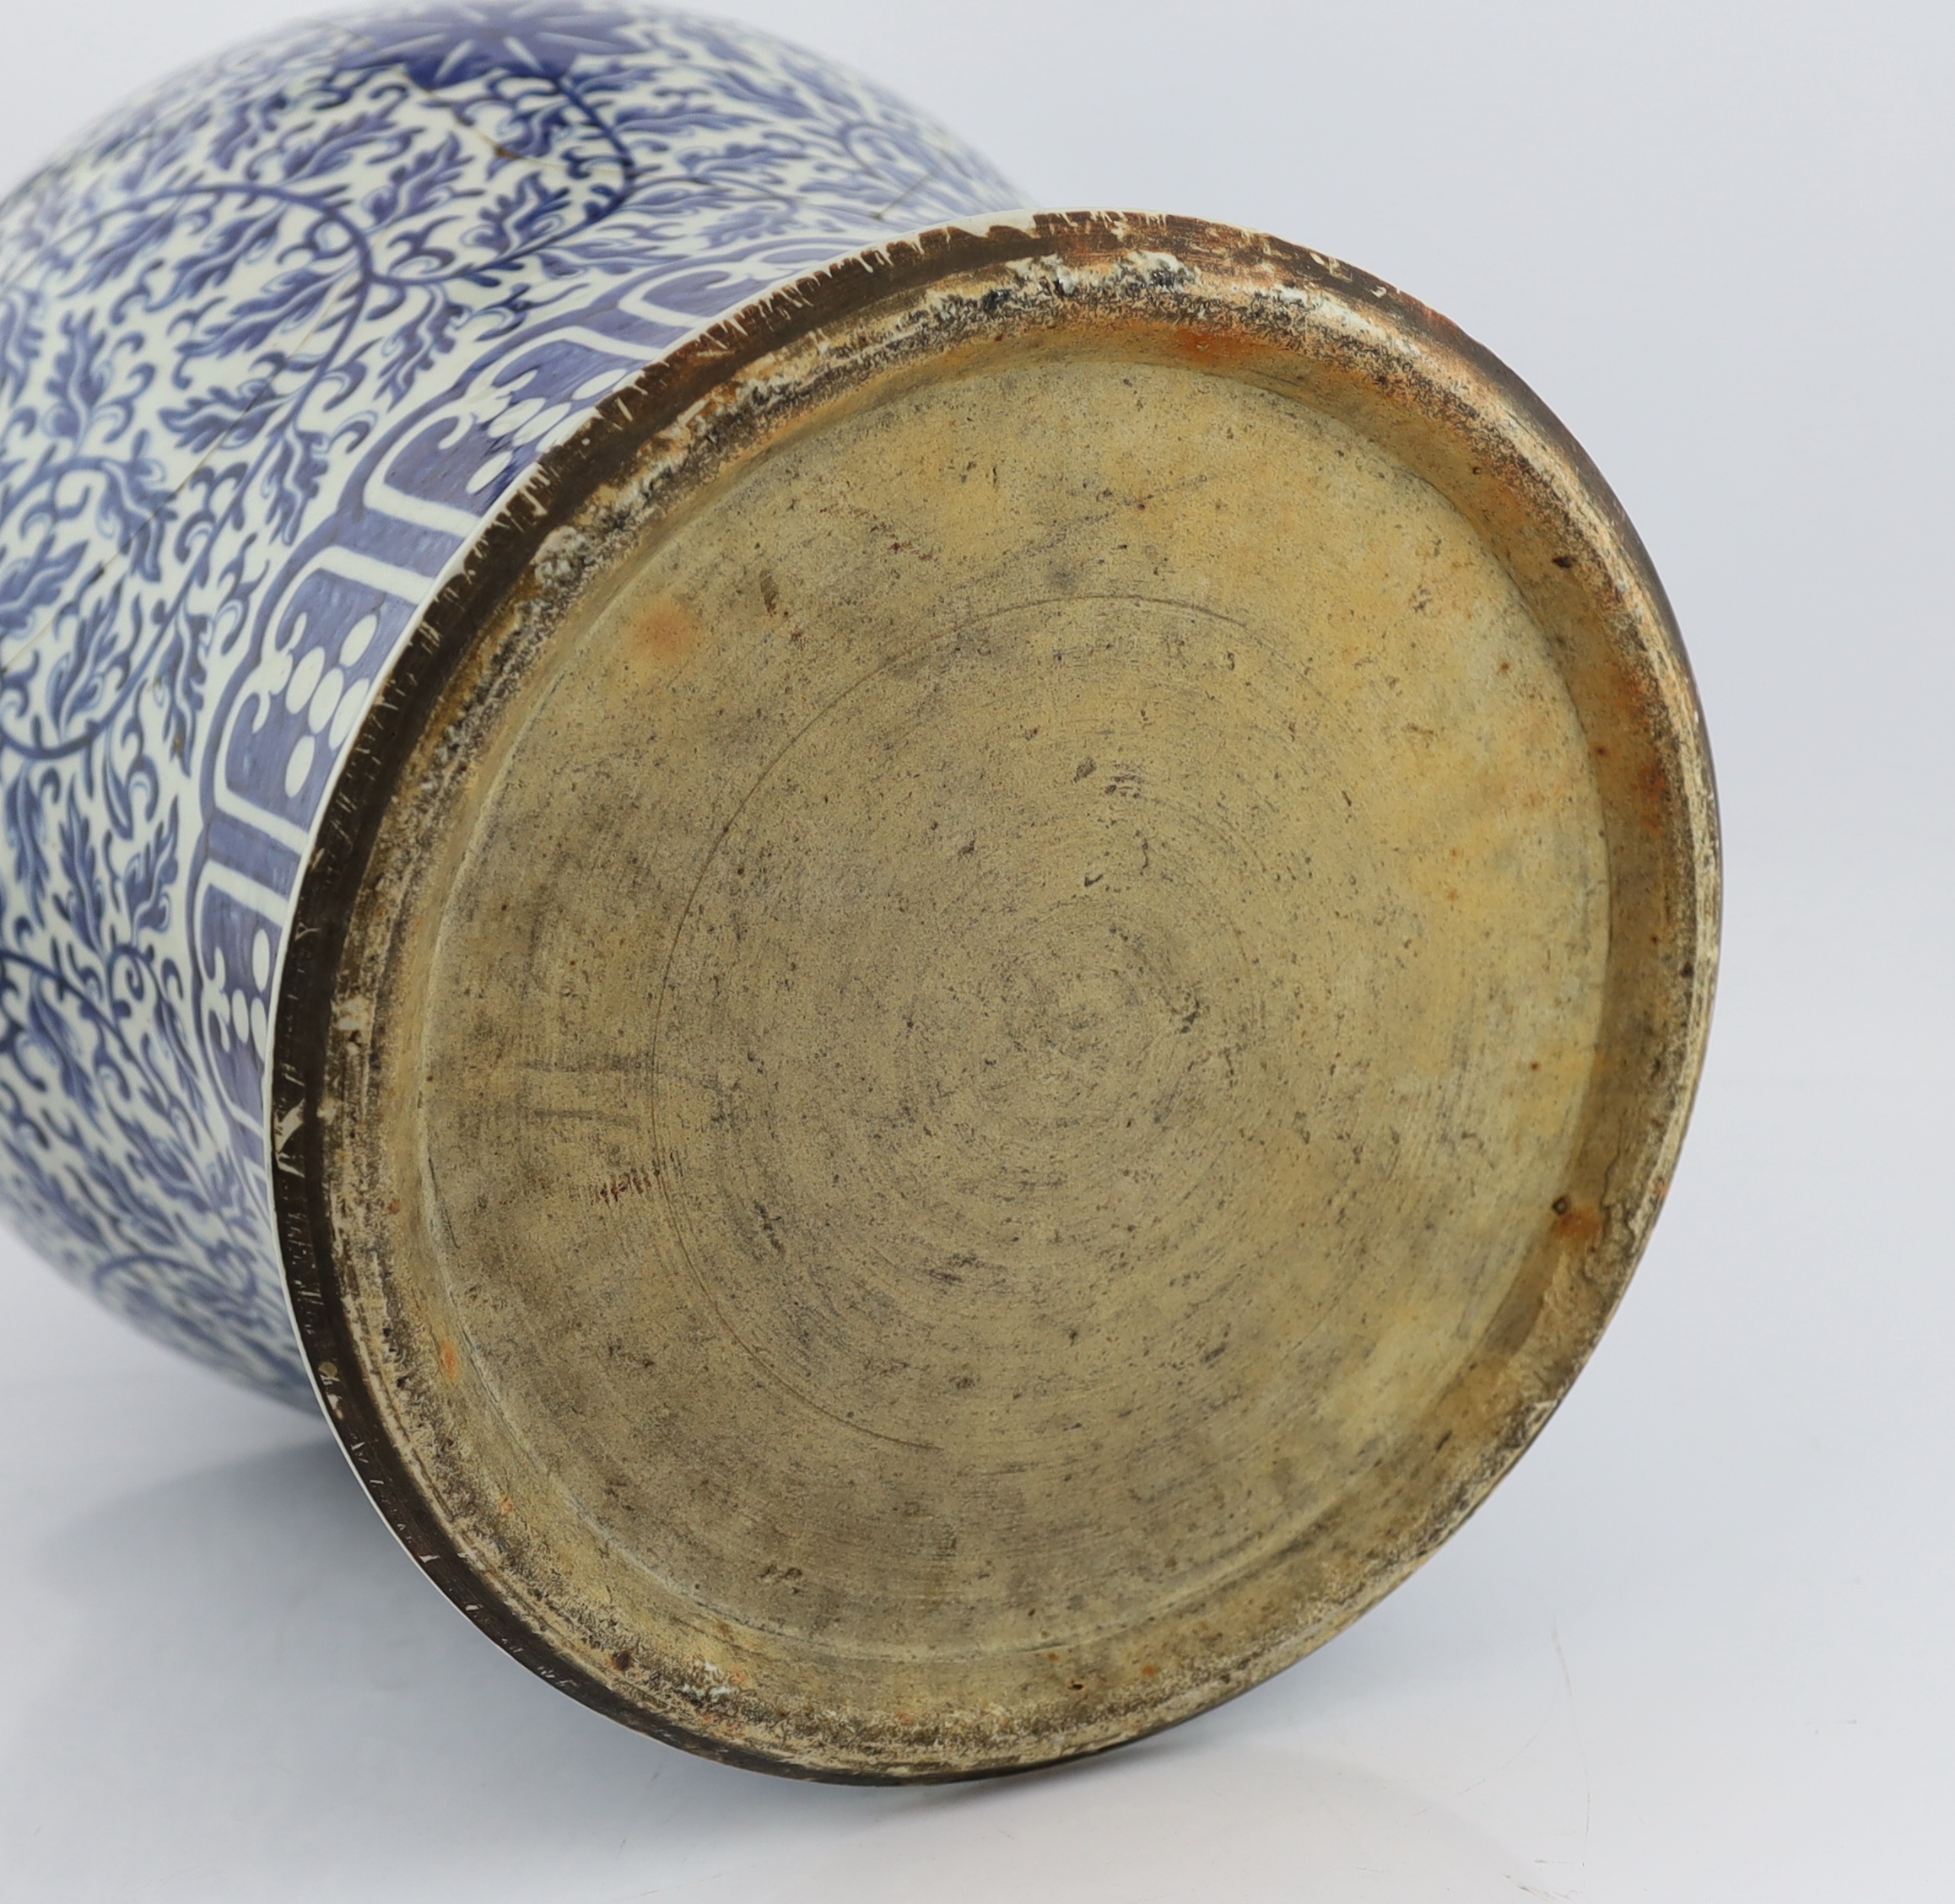 A massive Chinese blue and white ‘lotus’ vase and cover, 18th/19th century, broken and glued